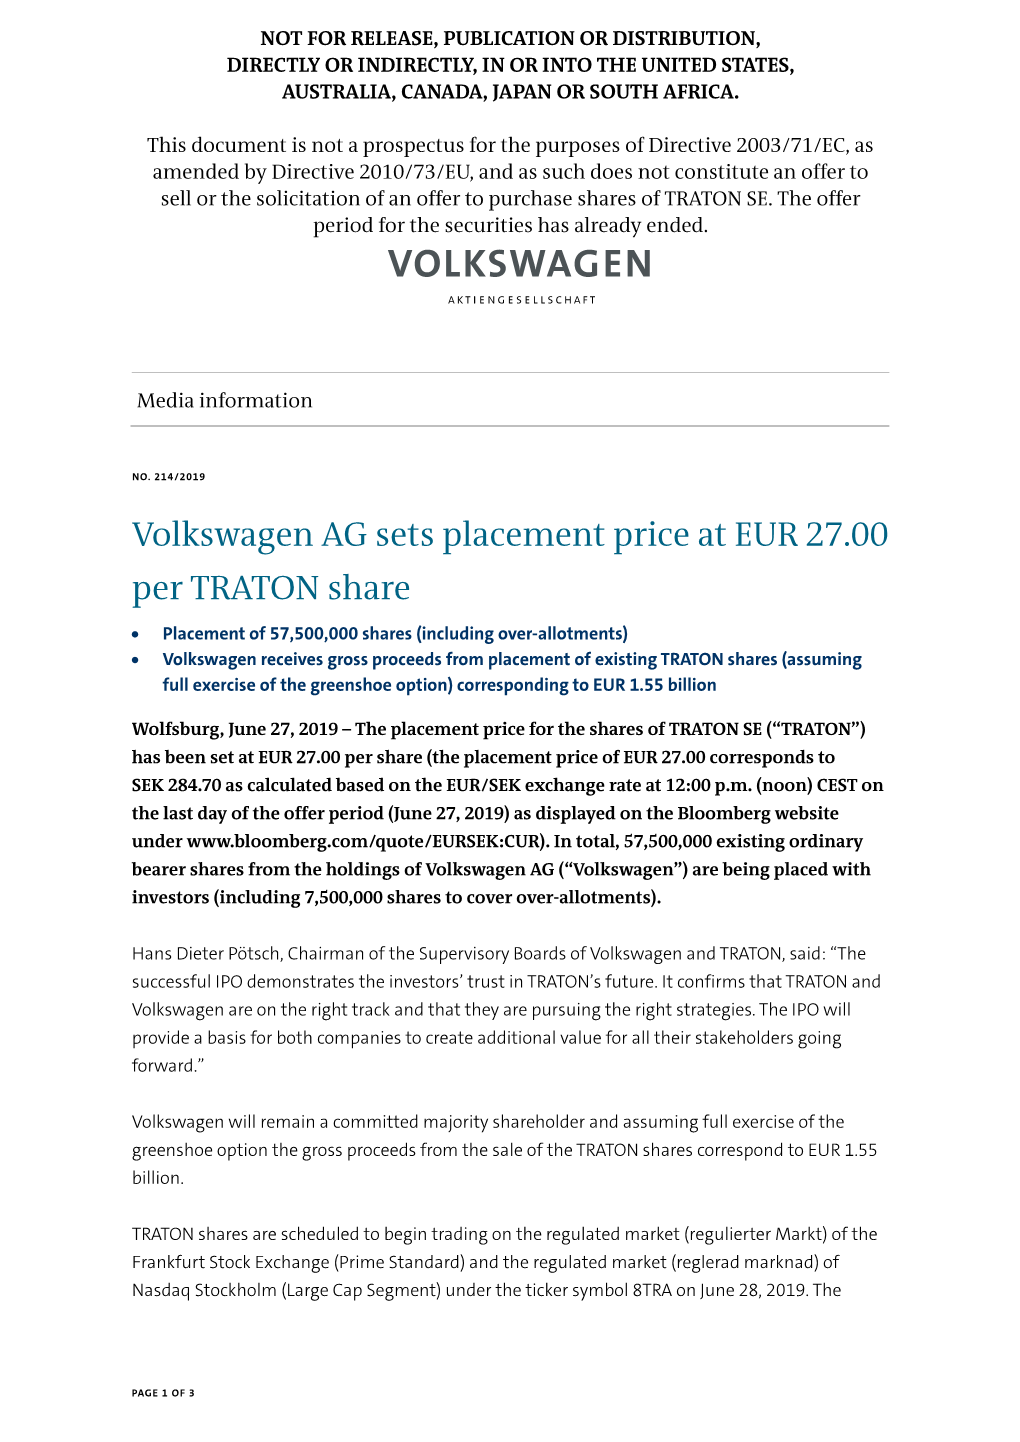 VOLKSWAGEN AG Placement Price